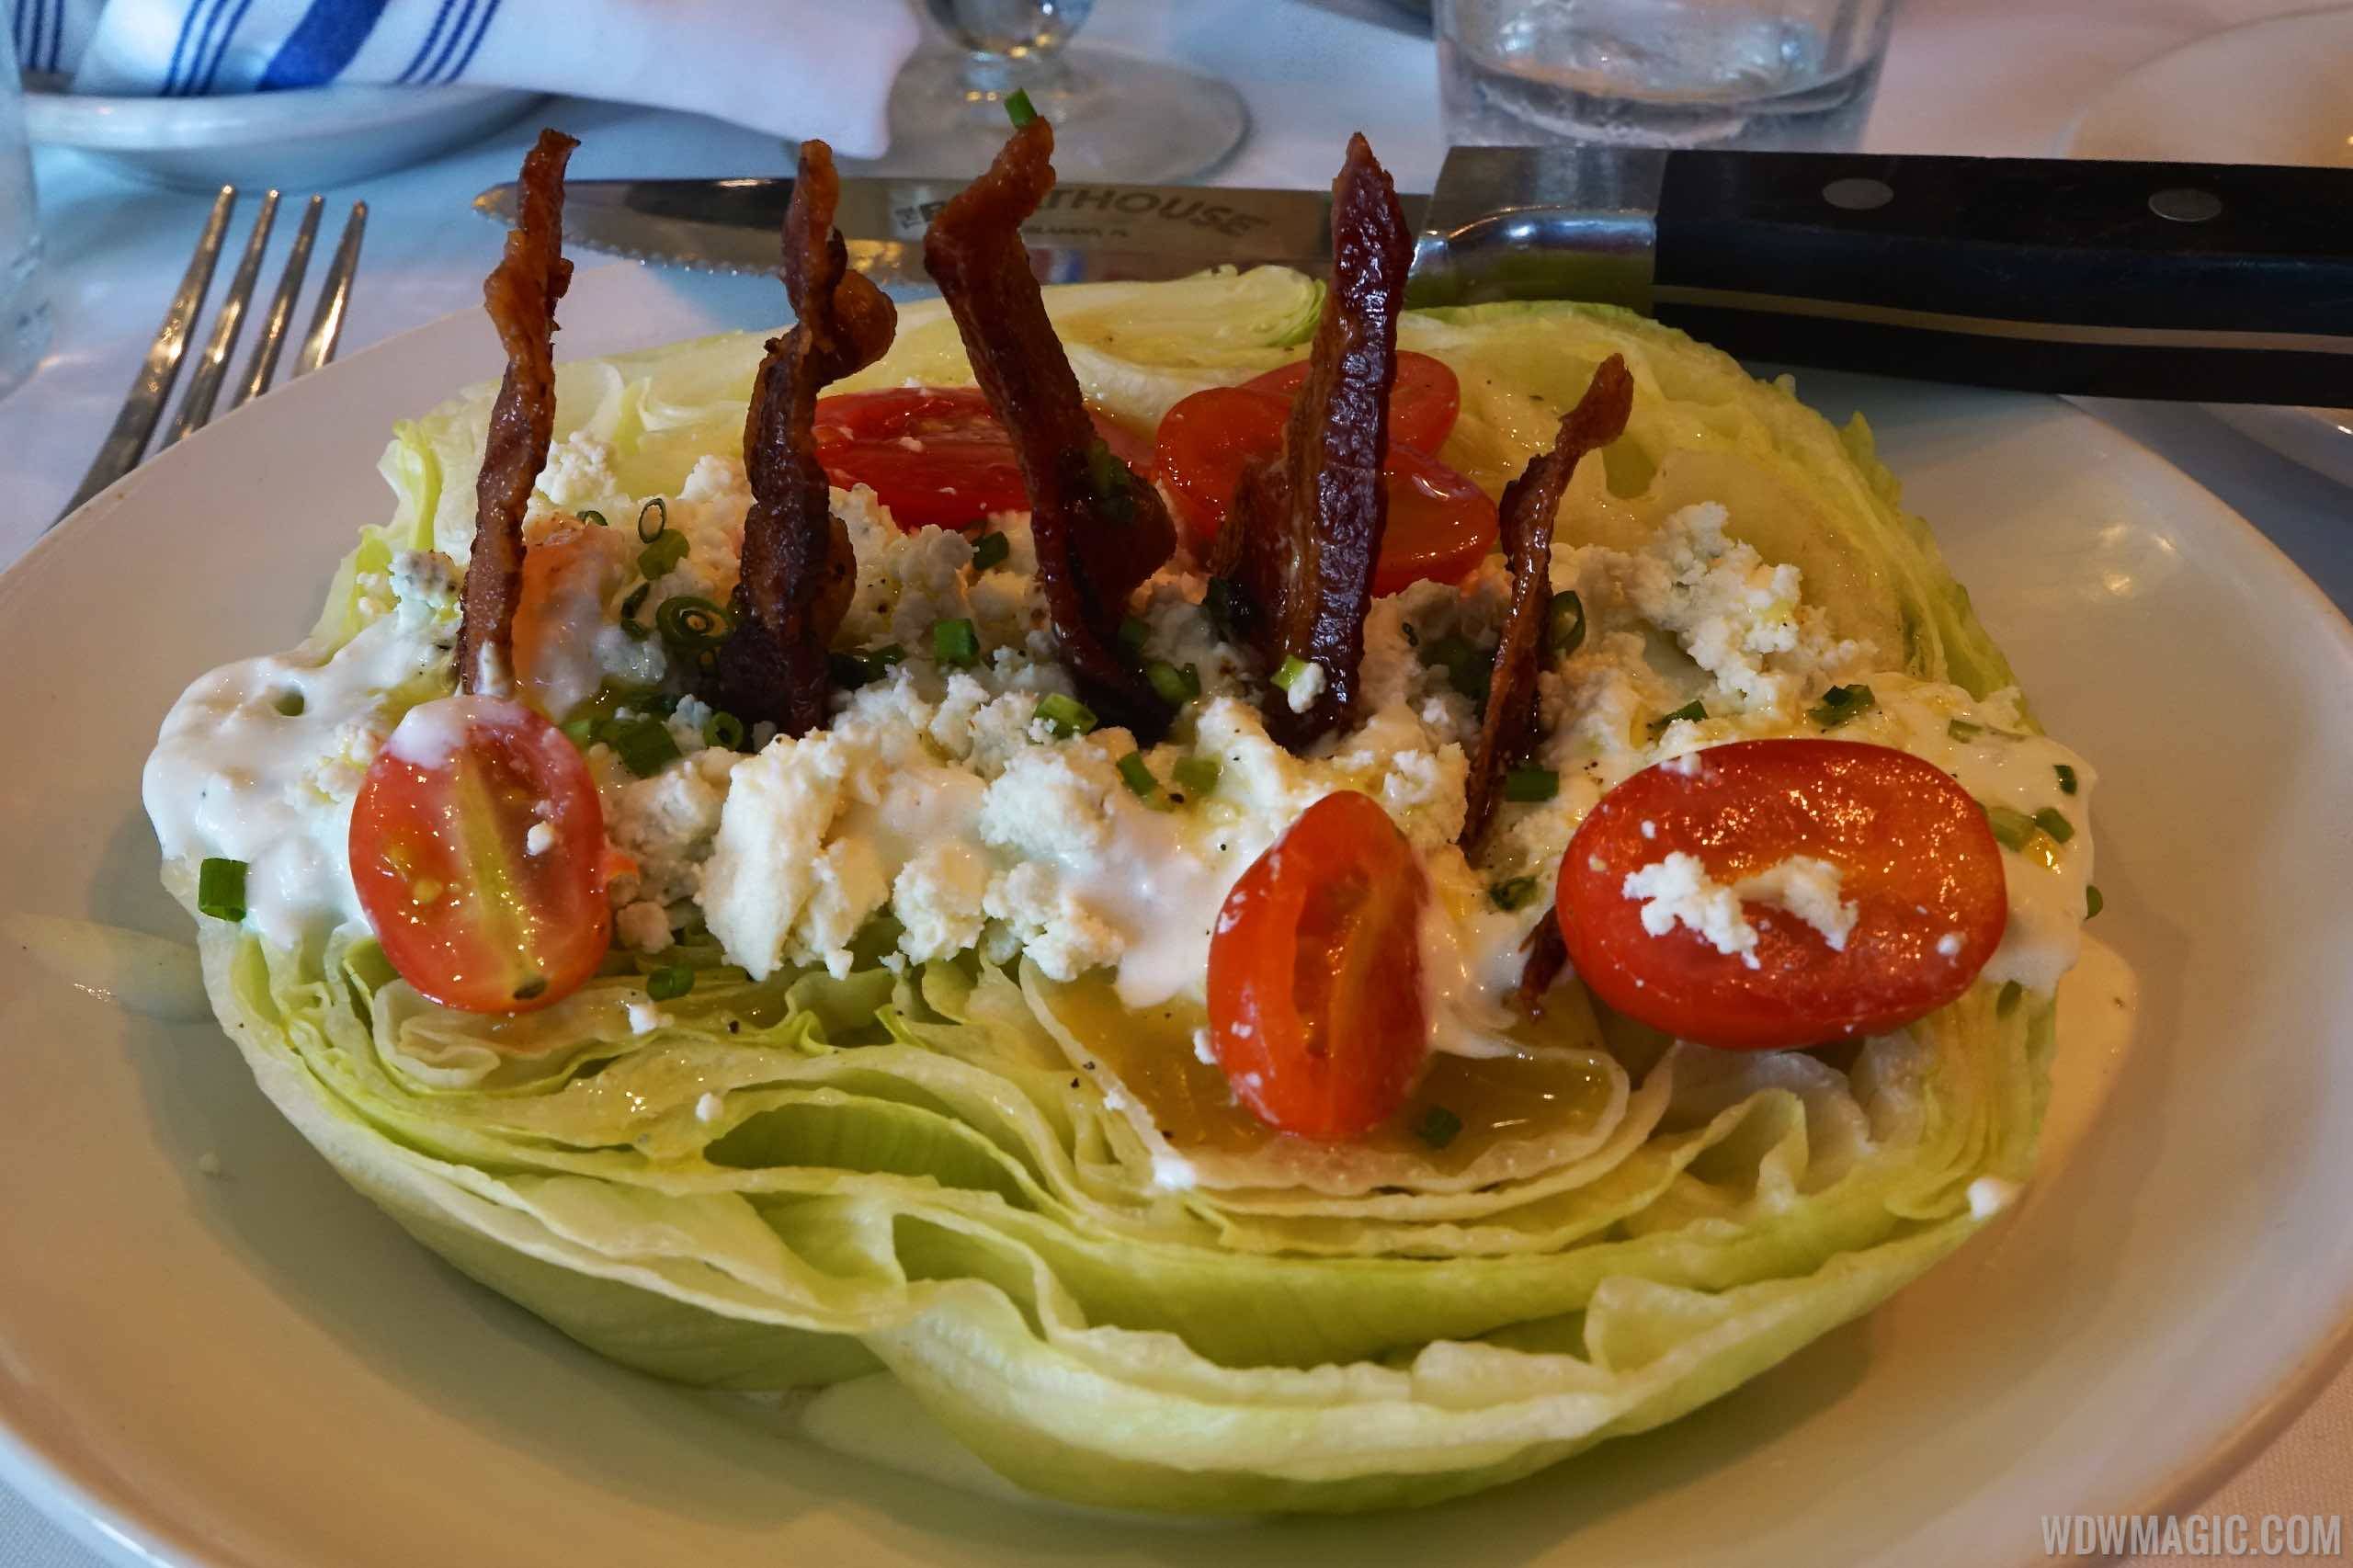 The BOATHOUSE Lunch - The Plank Wedge Salad